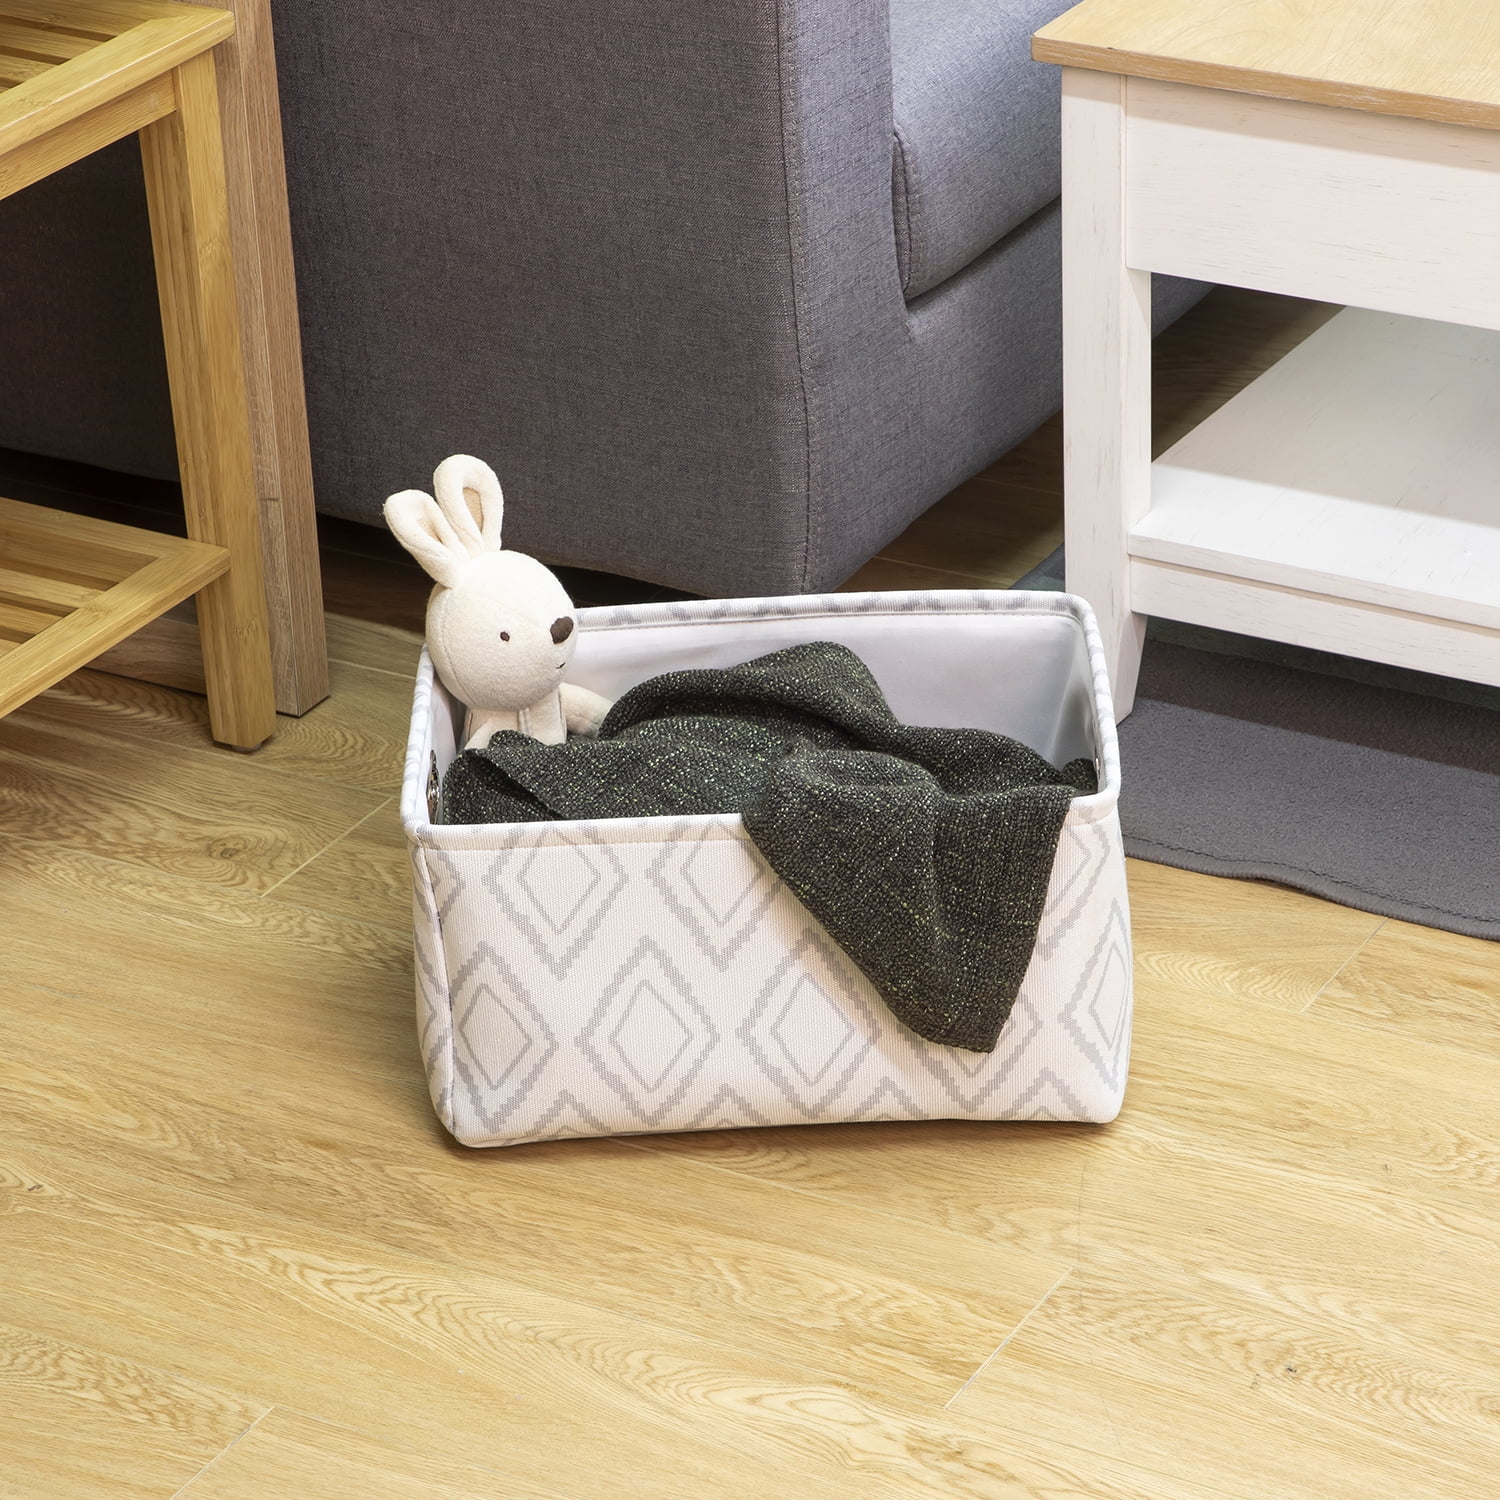 Mainstays Natural Canvas Storage Basket with Handles, Size: 15W x 11.02 D x 7.87 H in